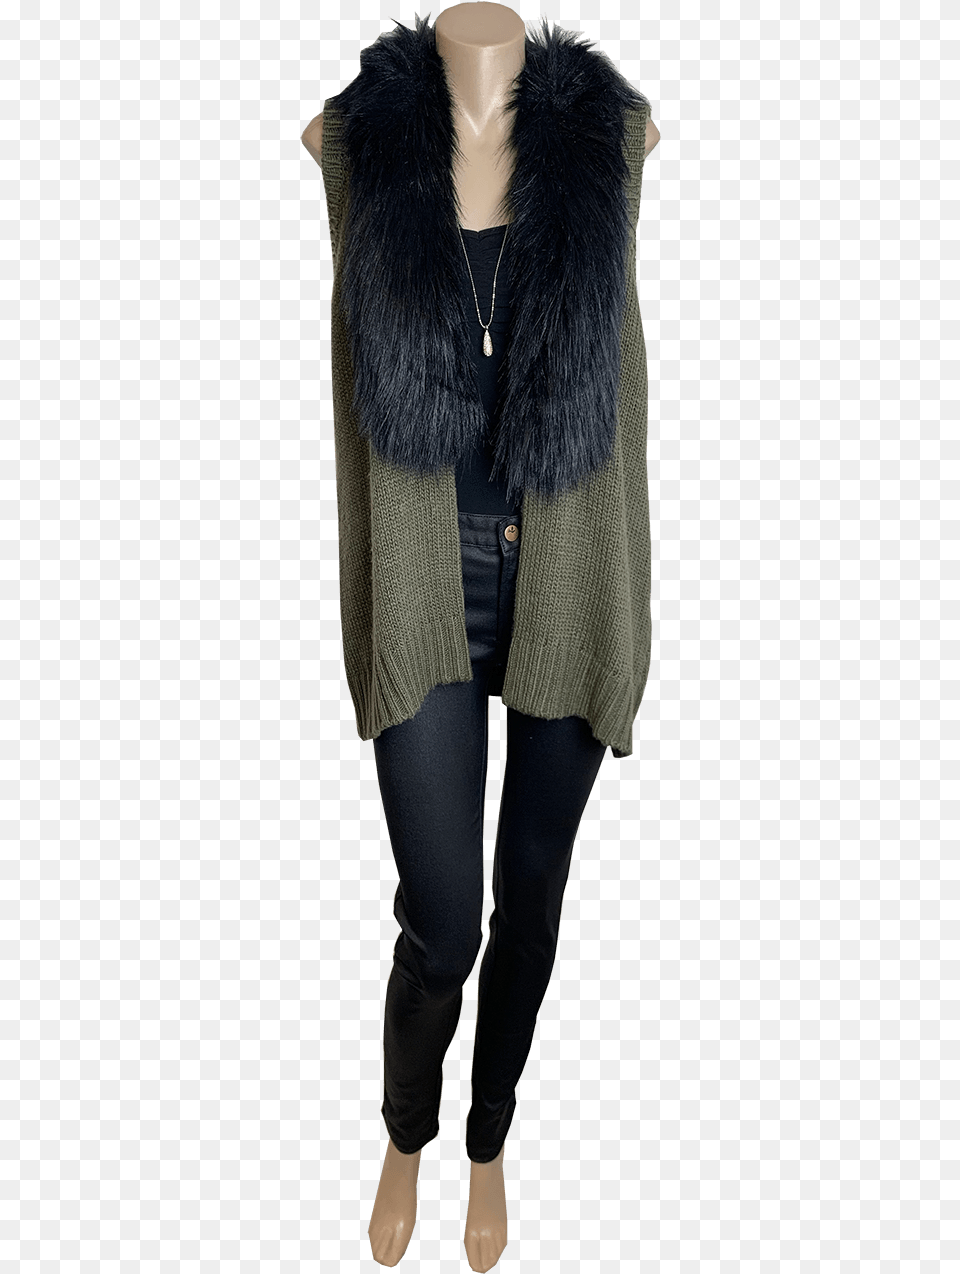 Wool, Clothing, Knitwear, Sweater, Coat Png Image